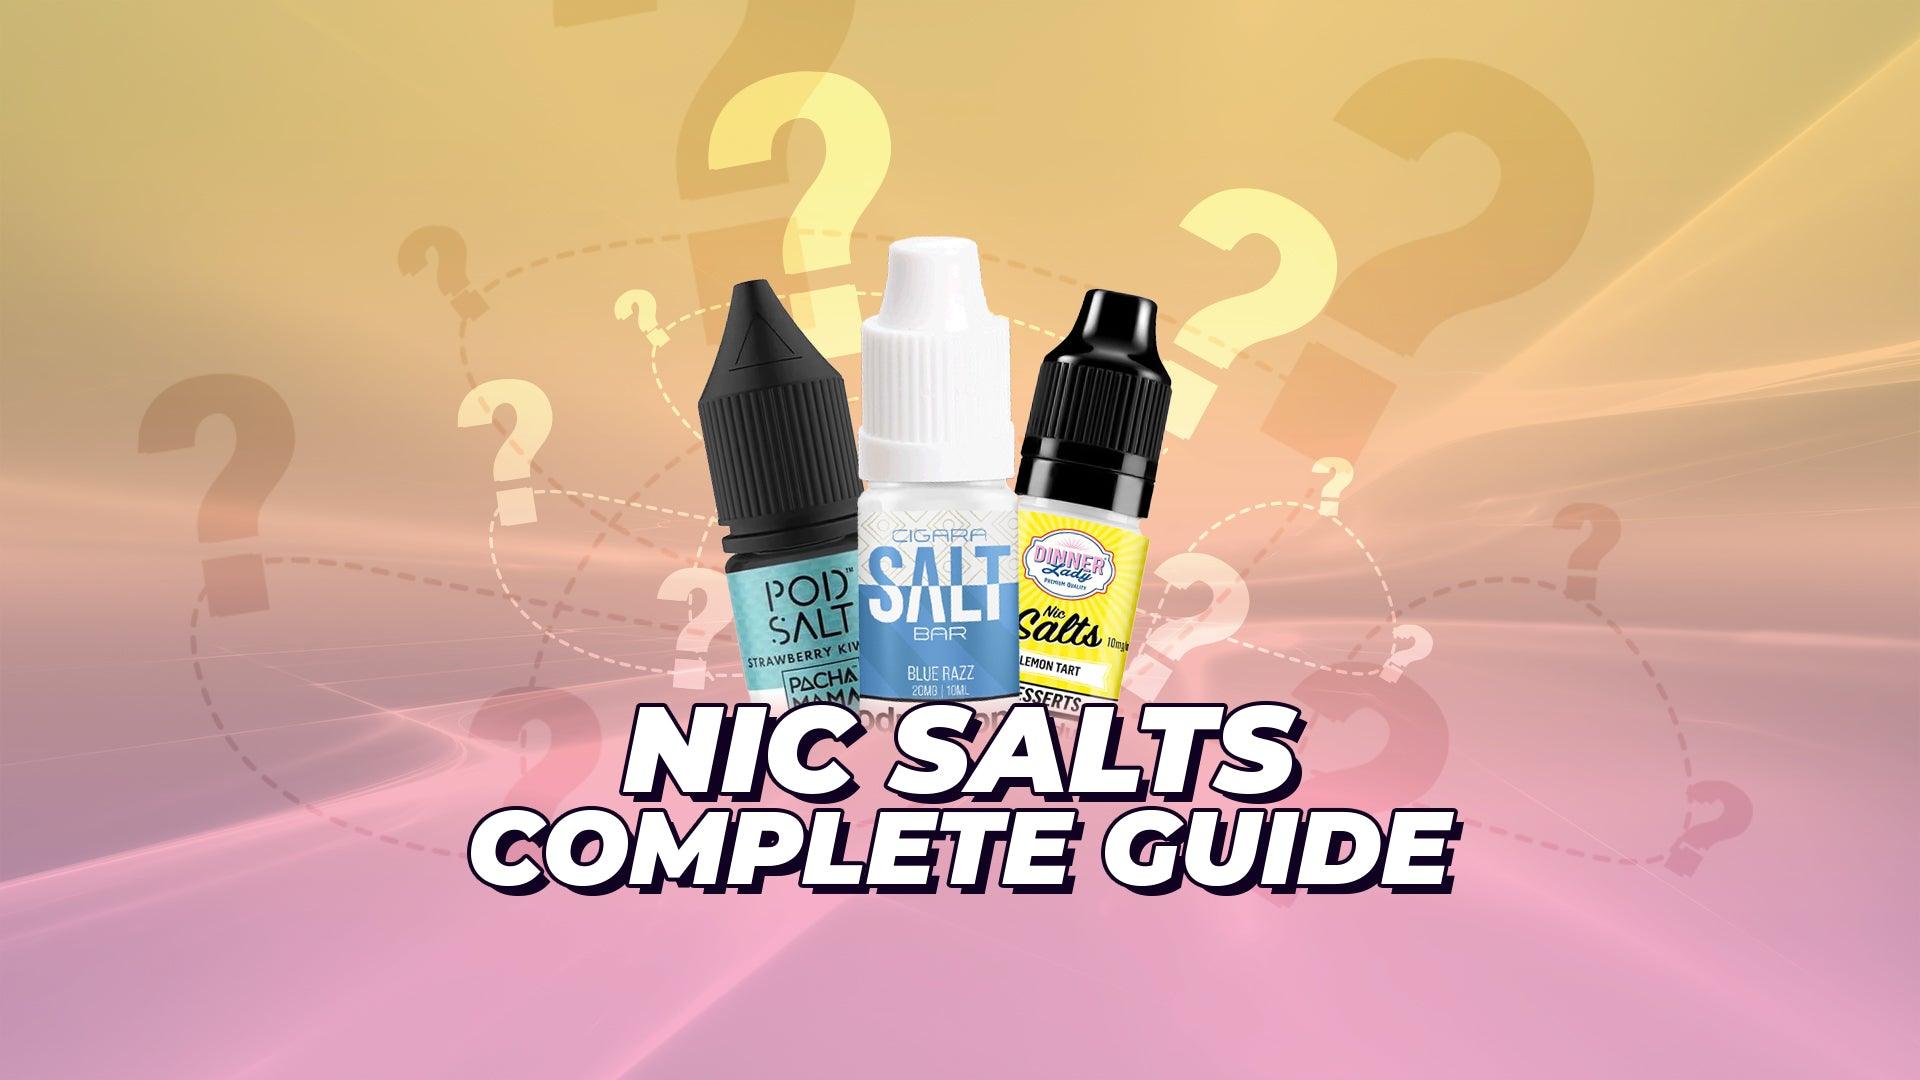 Ultimate Guide To Nicotine Salts - Category:E-Liquids, Sub Category:Nicotine Salts